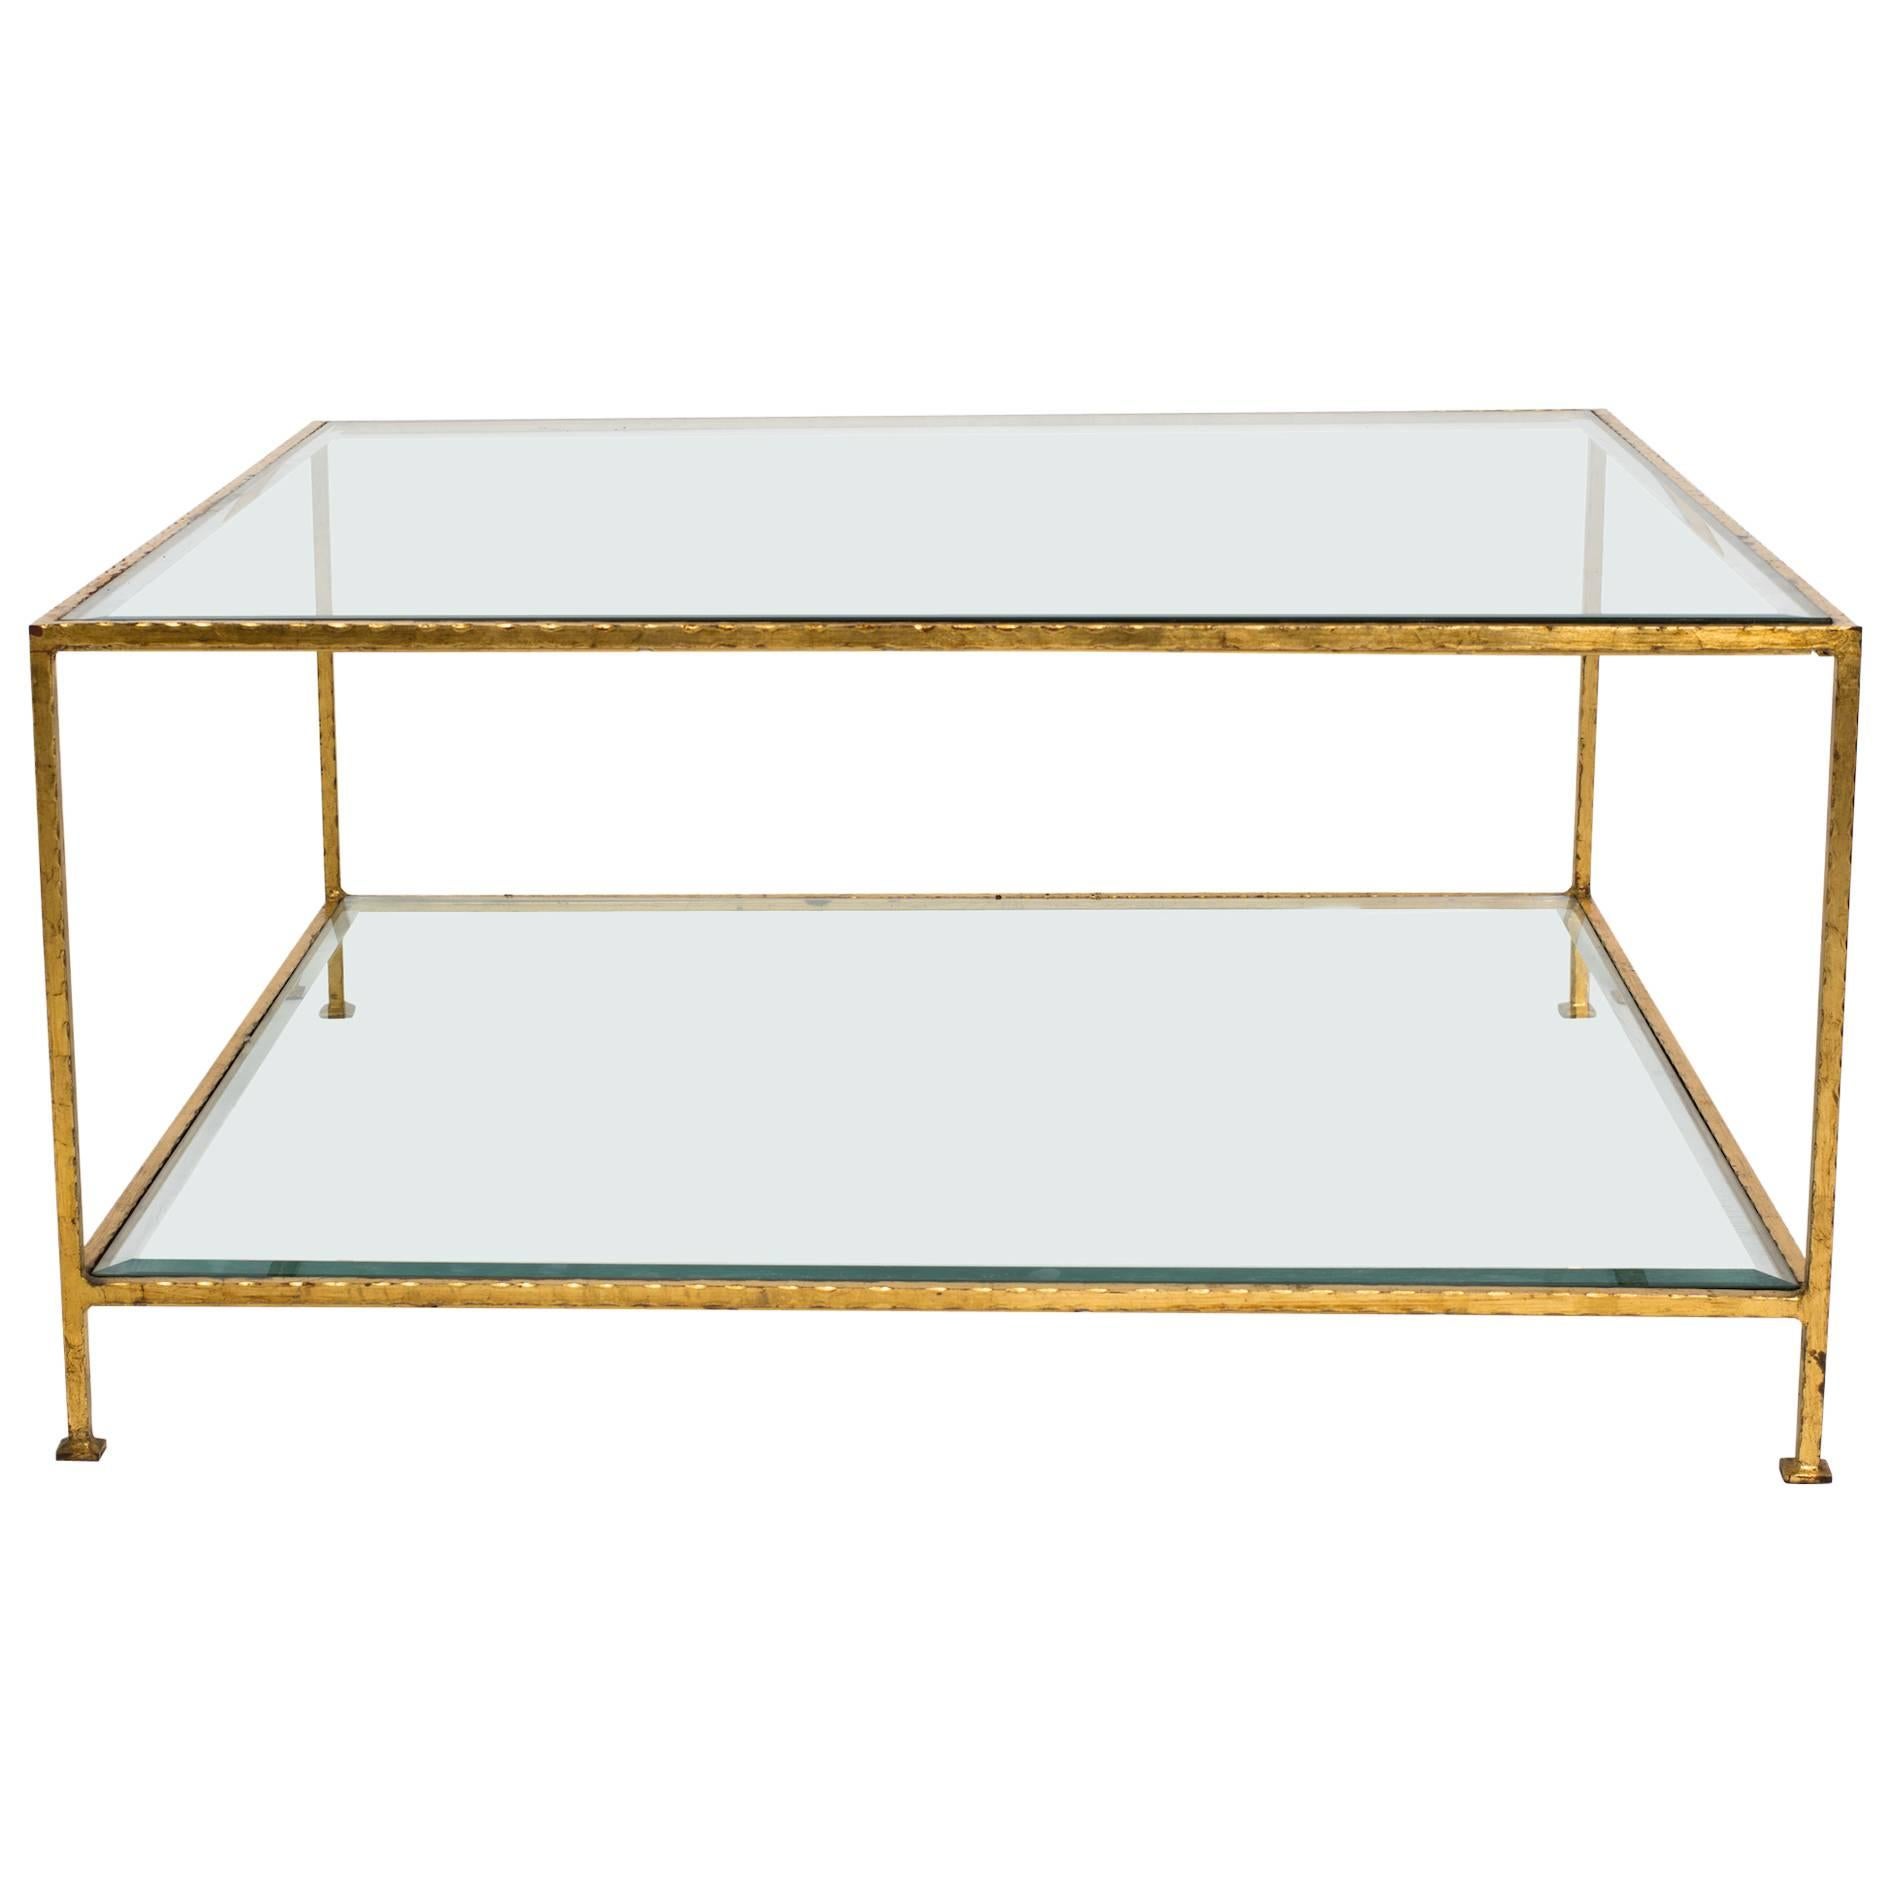 Two-Tiered Gilt Iron Coffee Table